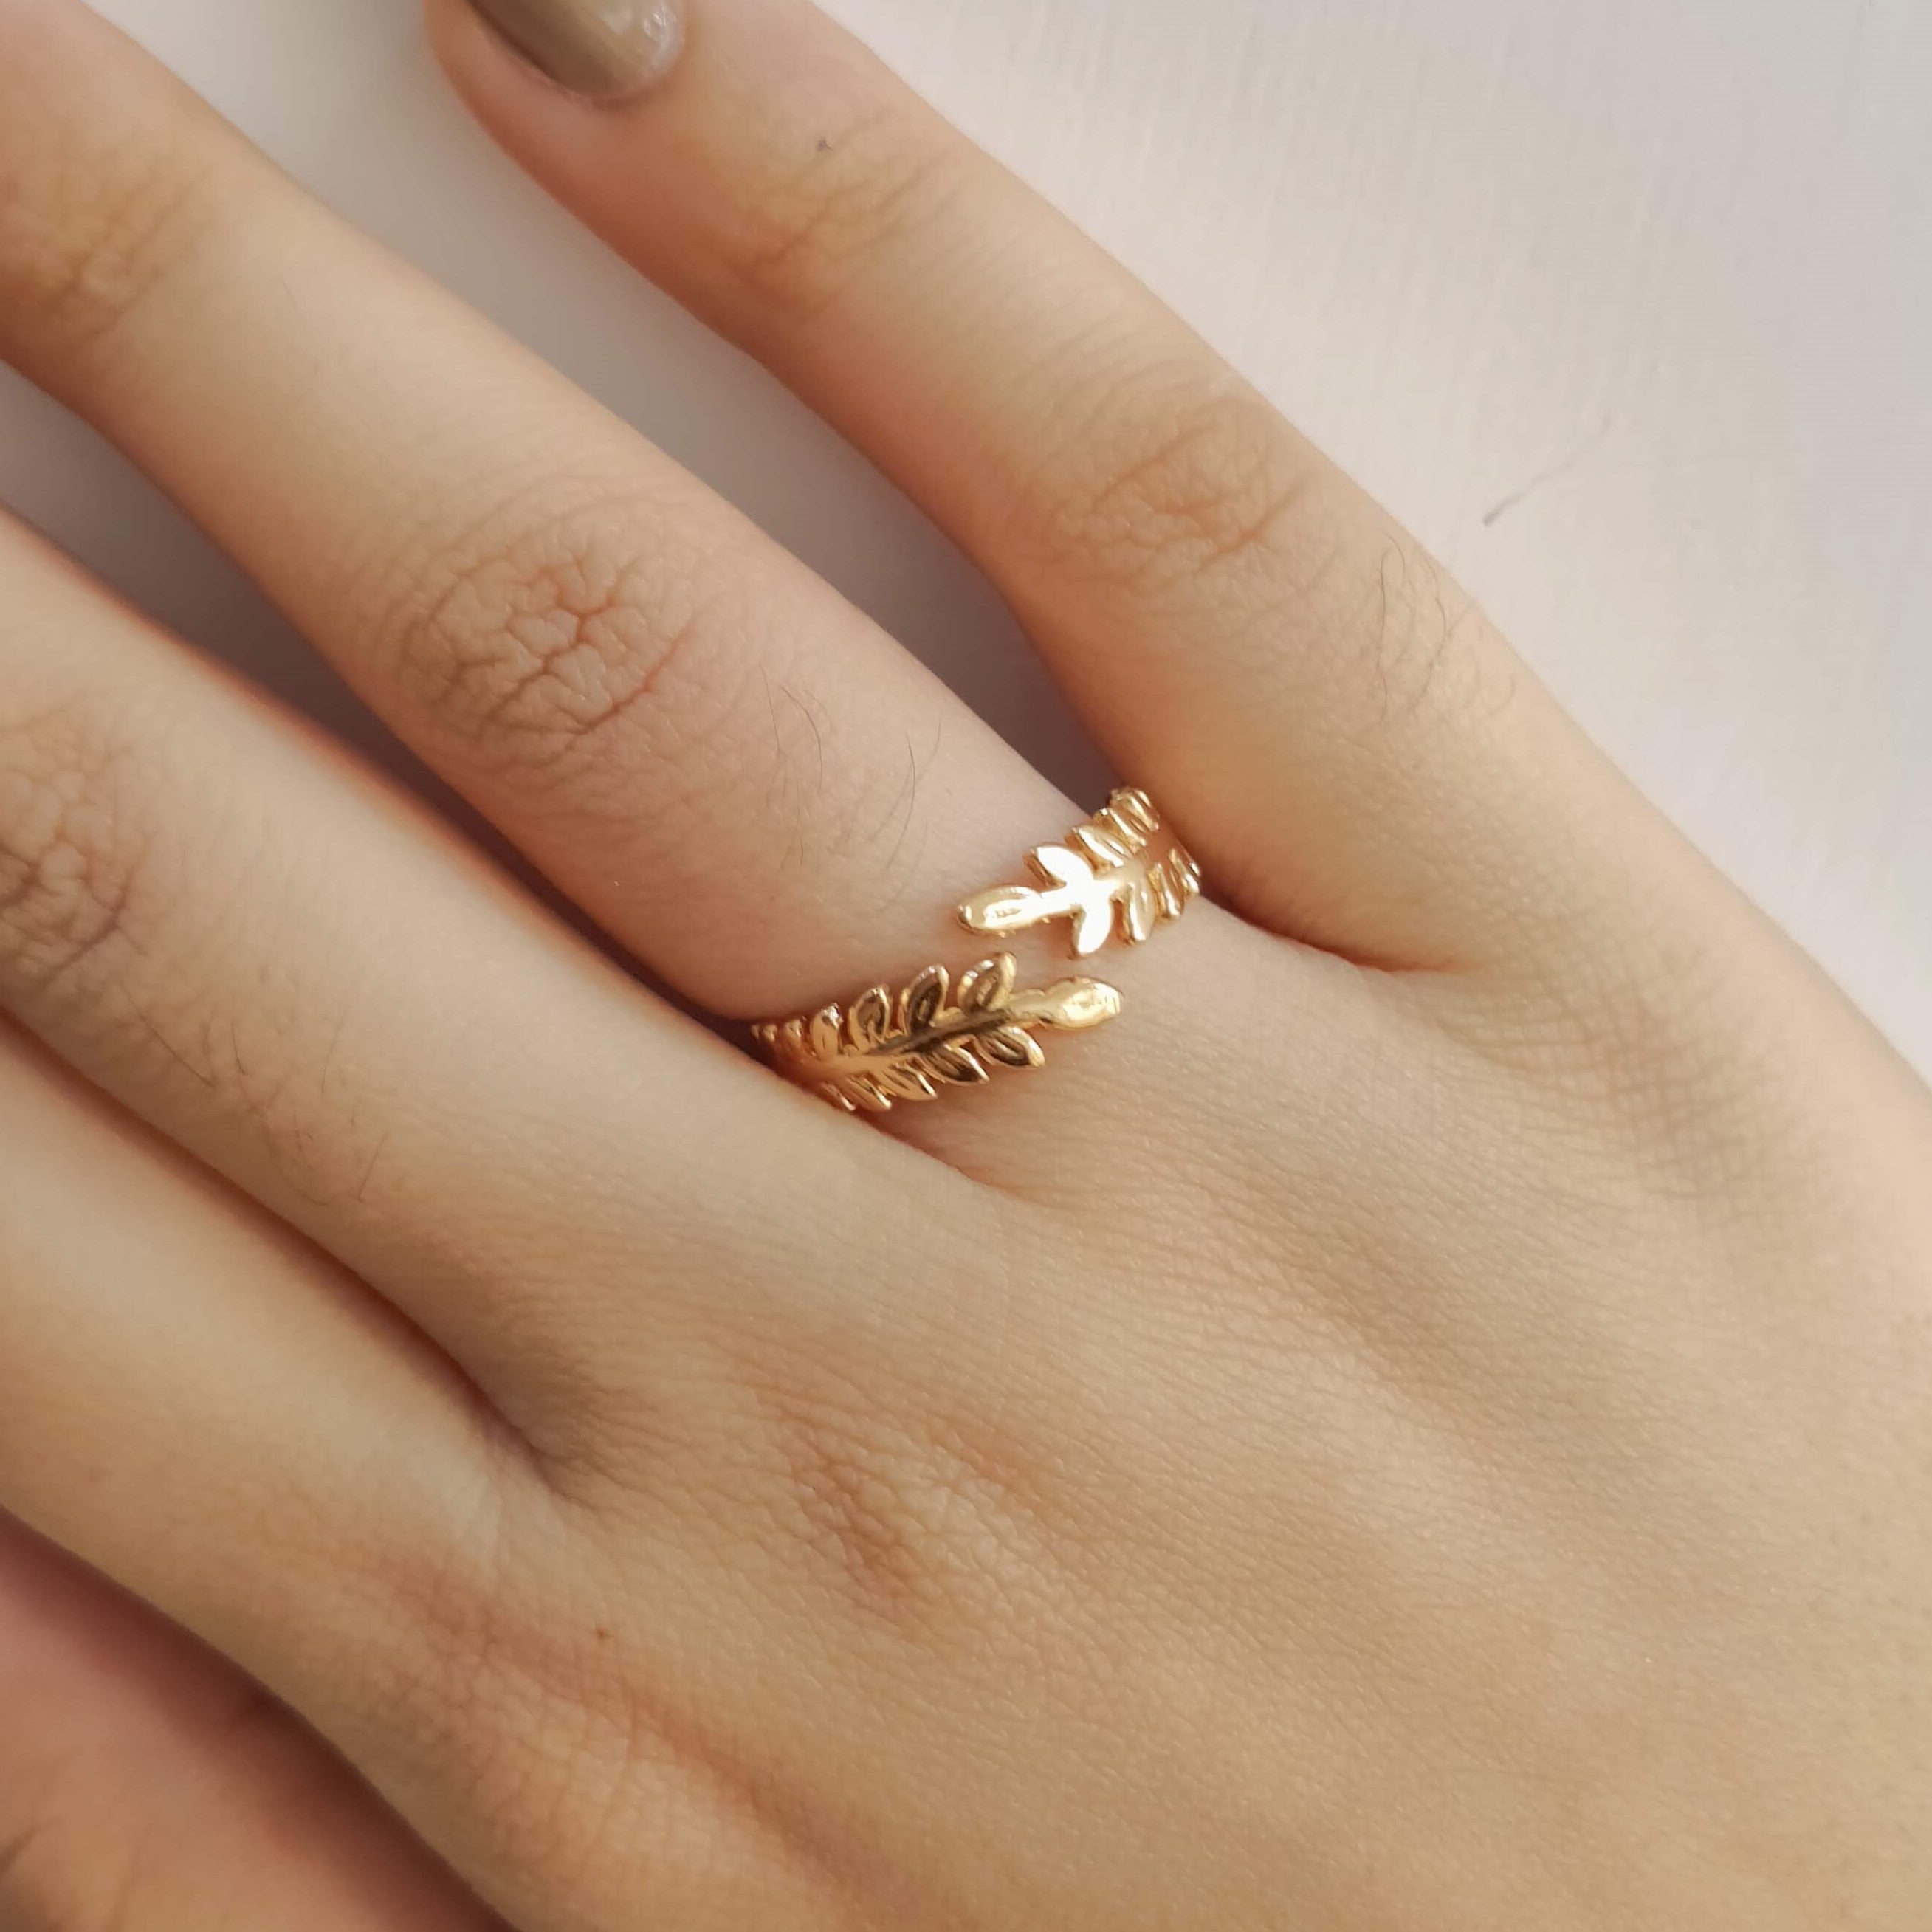 TFC 24K Leafy Crown Gold Plated Adjustable Ring